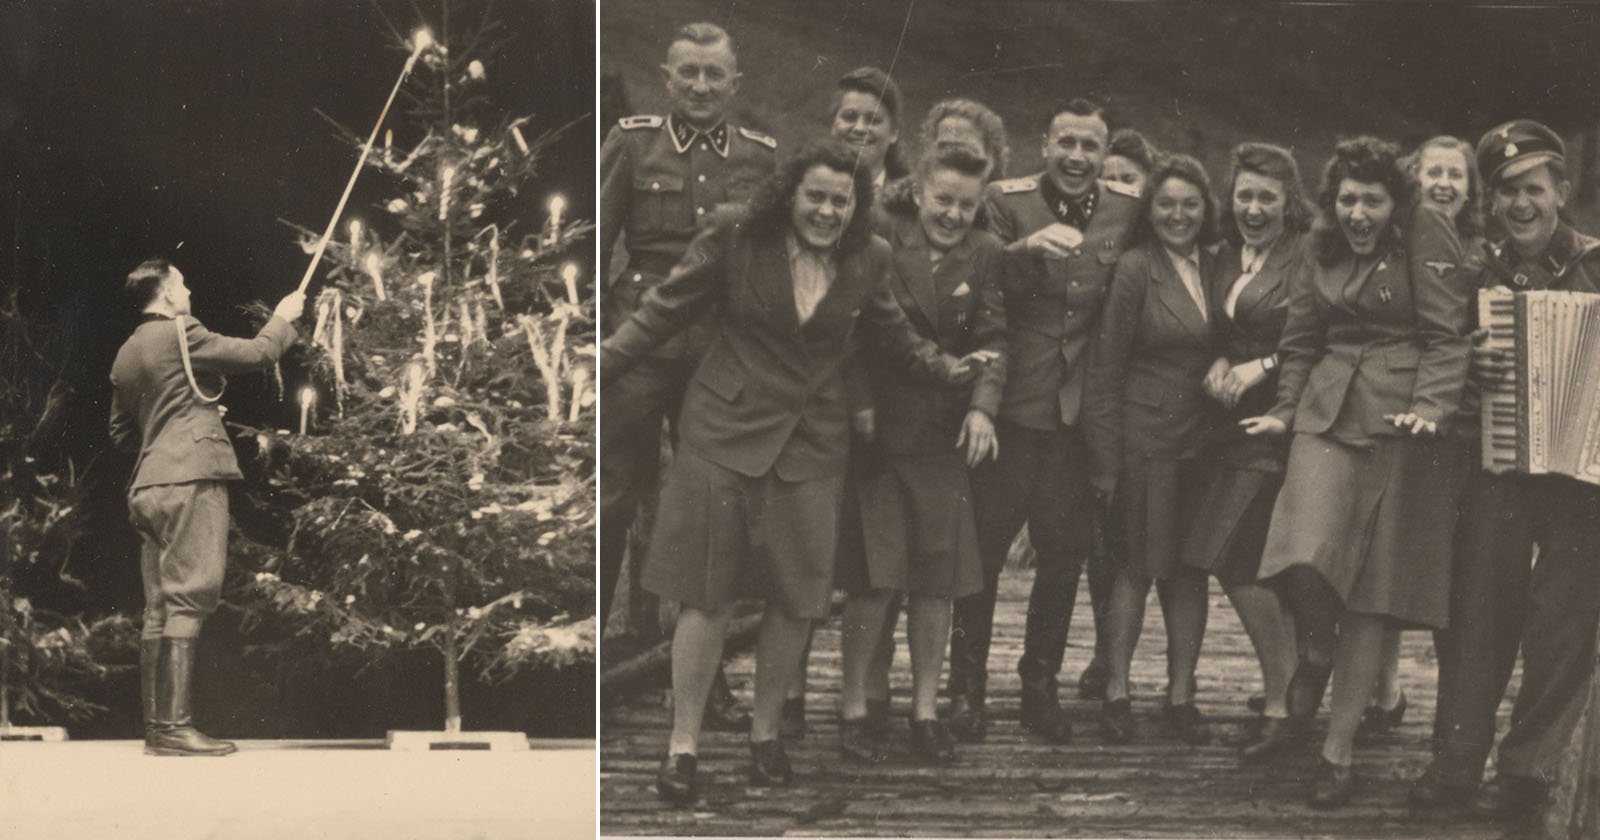  nazi chilling photos show how wanted remember auschwitz 